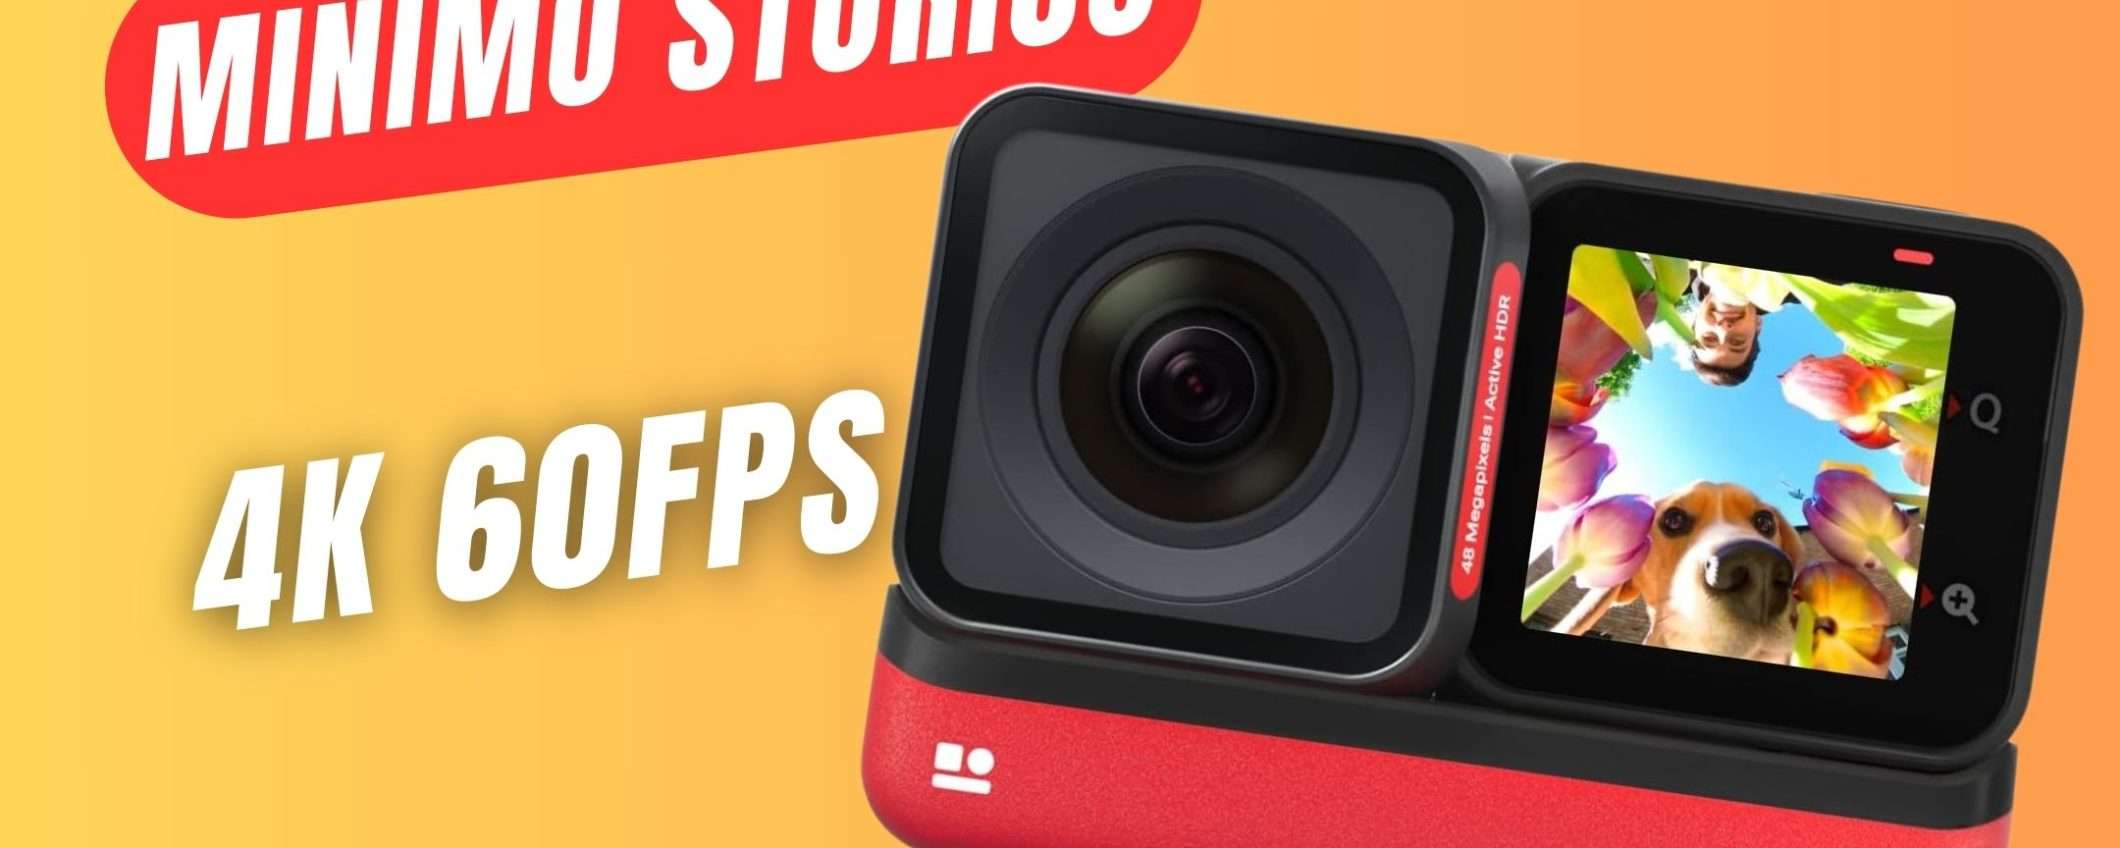 MINIMO STORICO per l'Action Cam insta360 One RS 4K Edition!